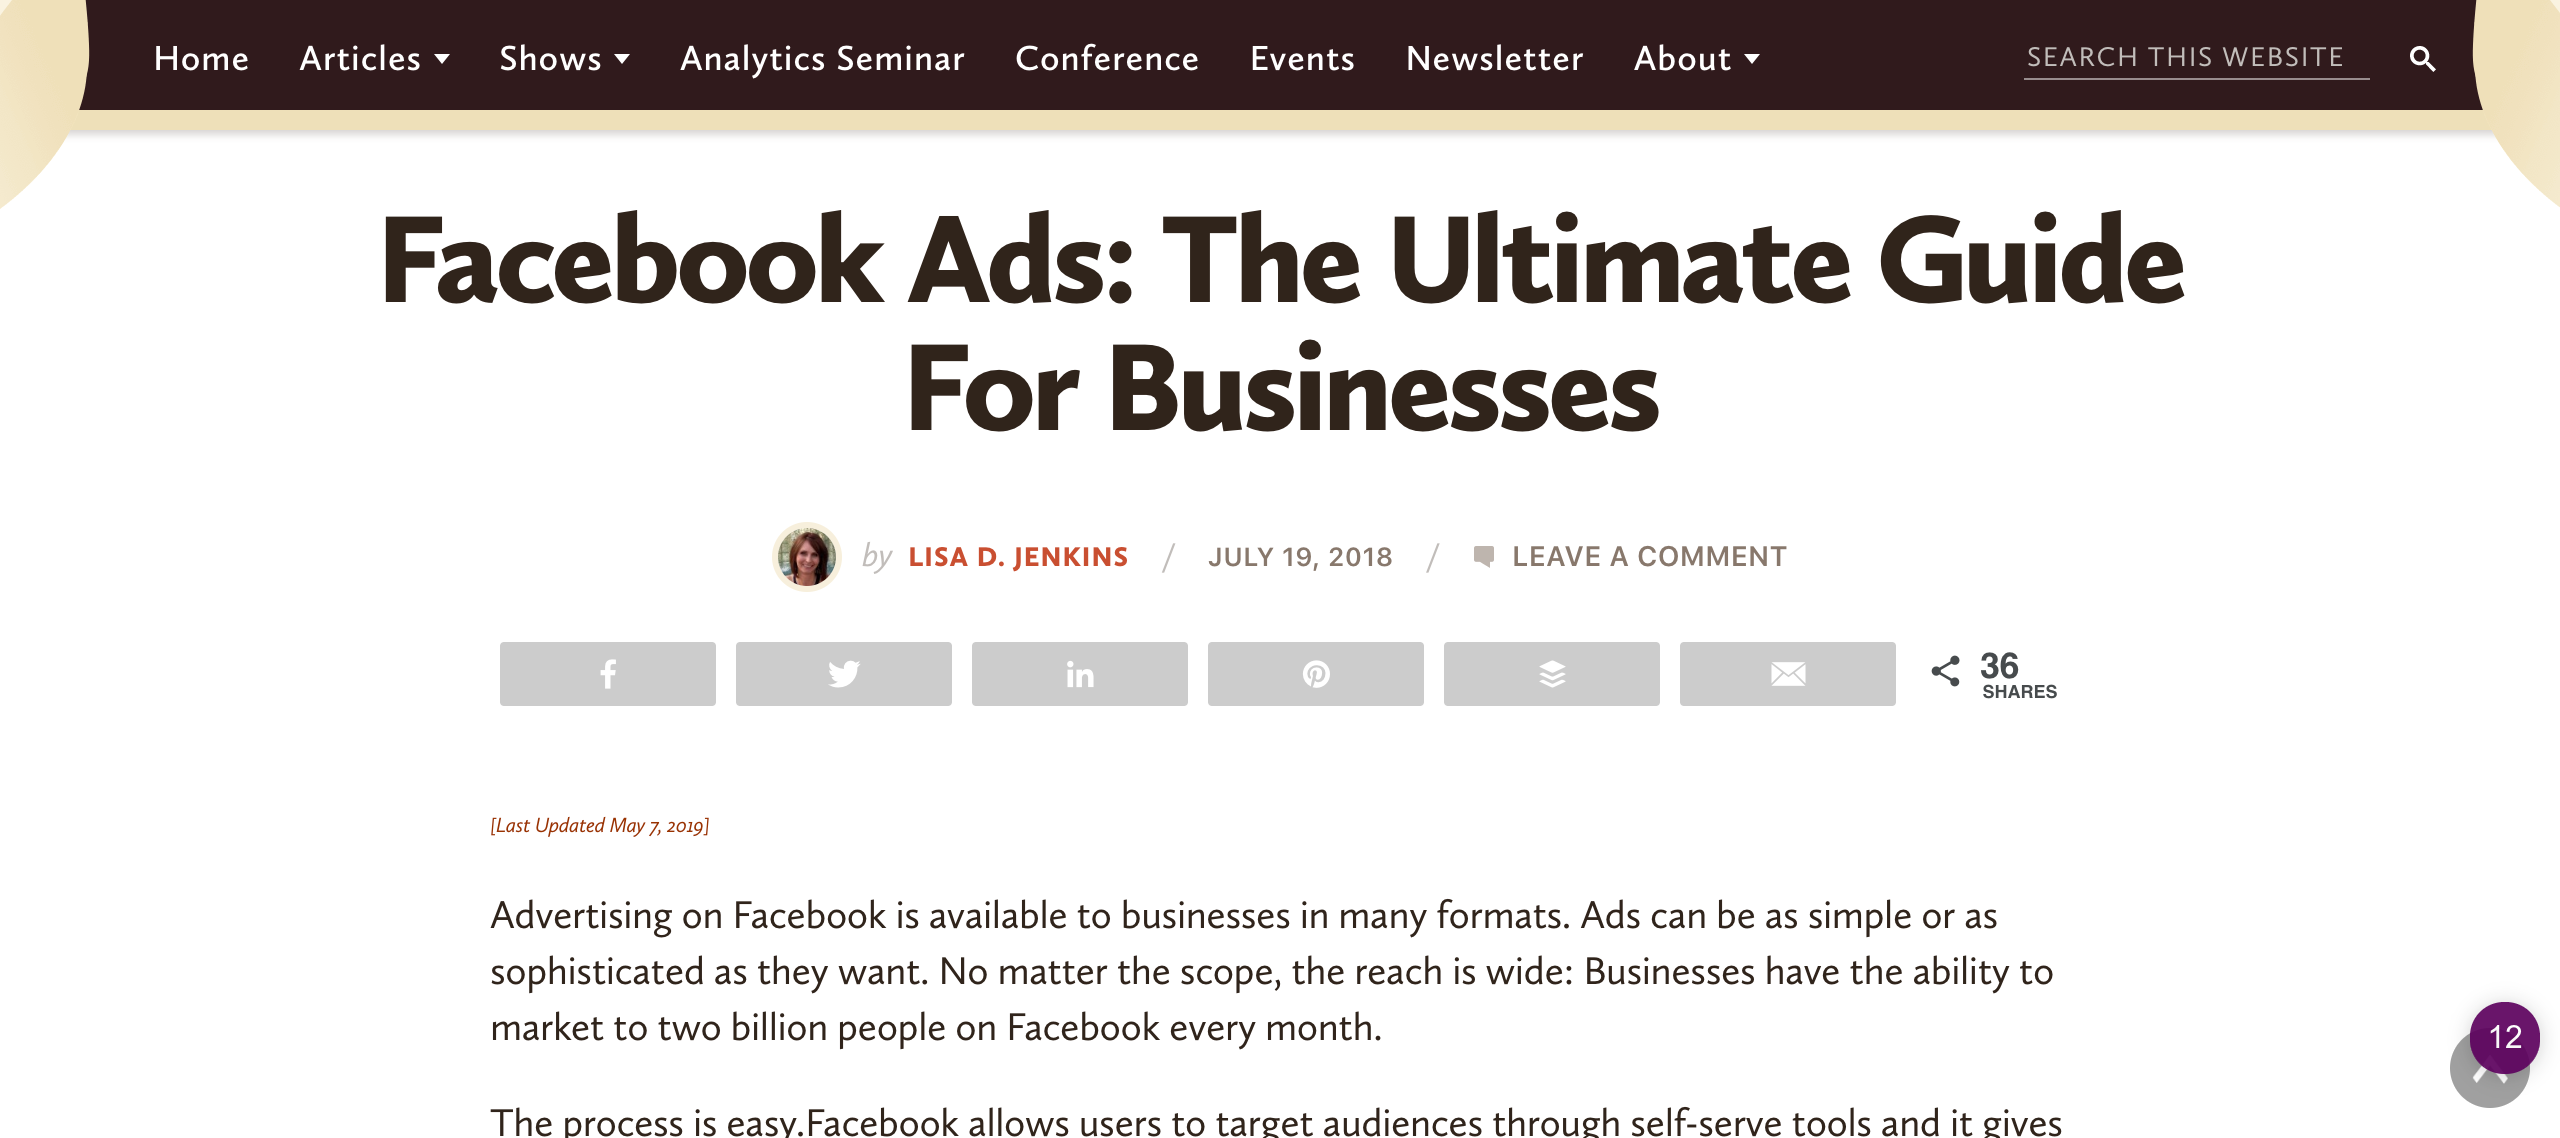 10 Hacks for Getting More From Your Facebook Ads : Social Media Examiner